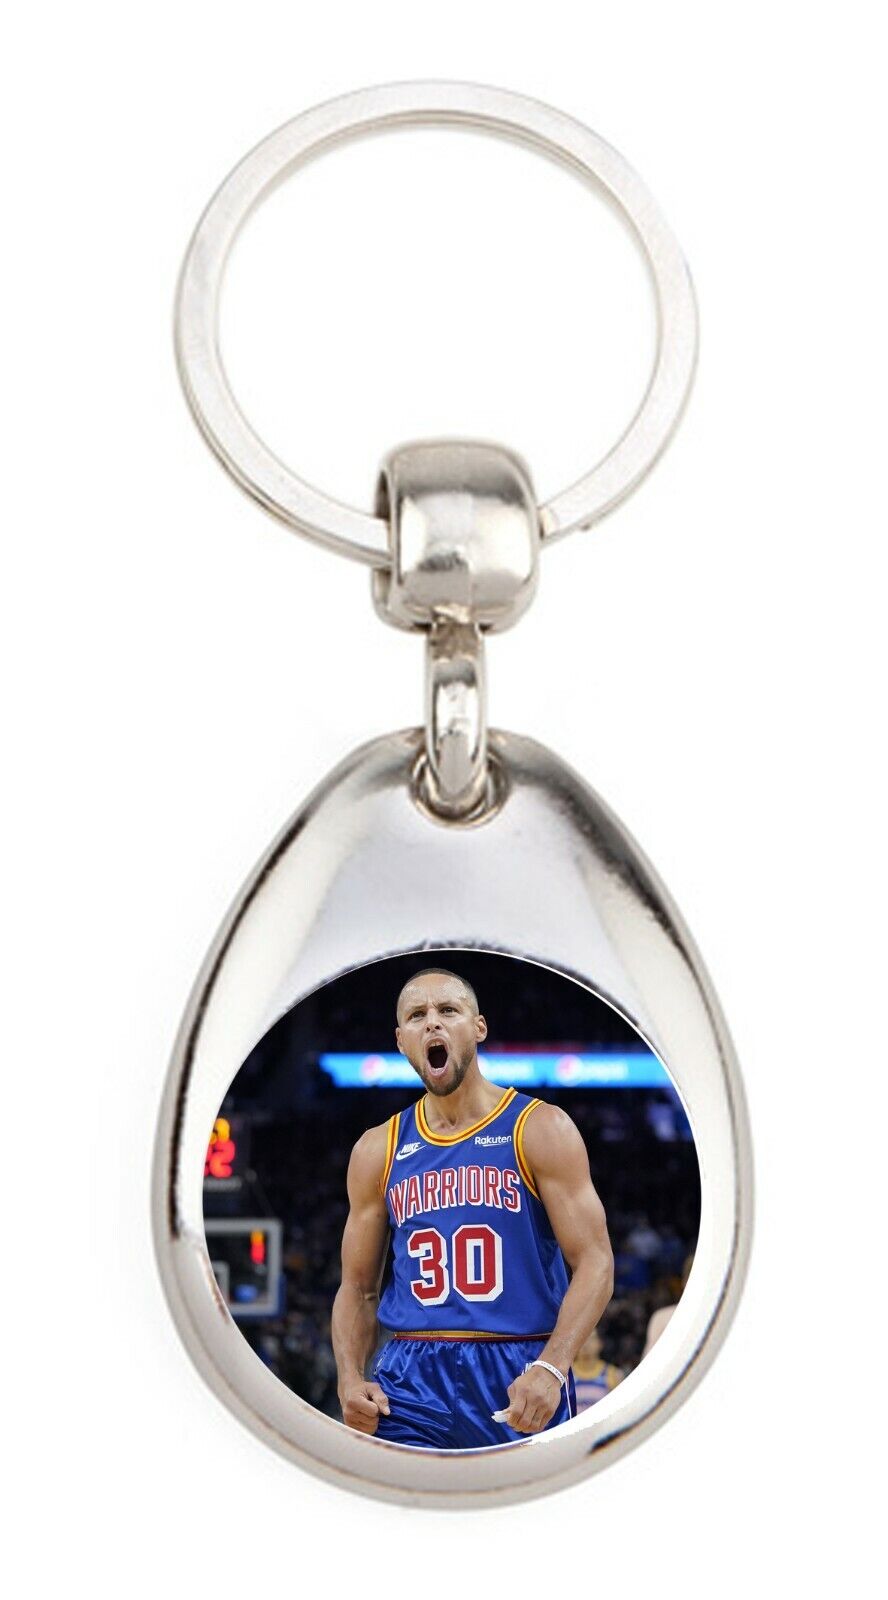 Stephen Curry 3 3 Point World Record Champion Basketball Metal Keychain